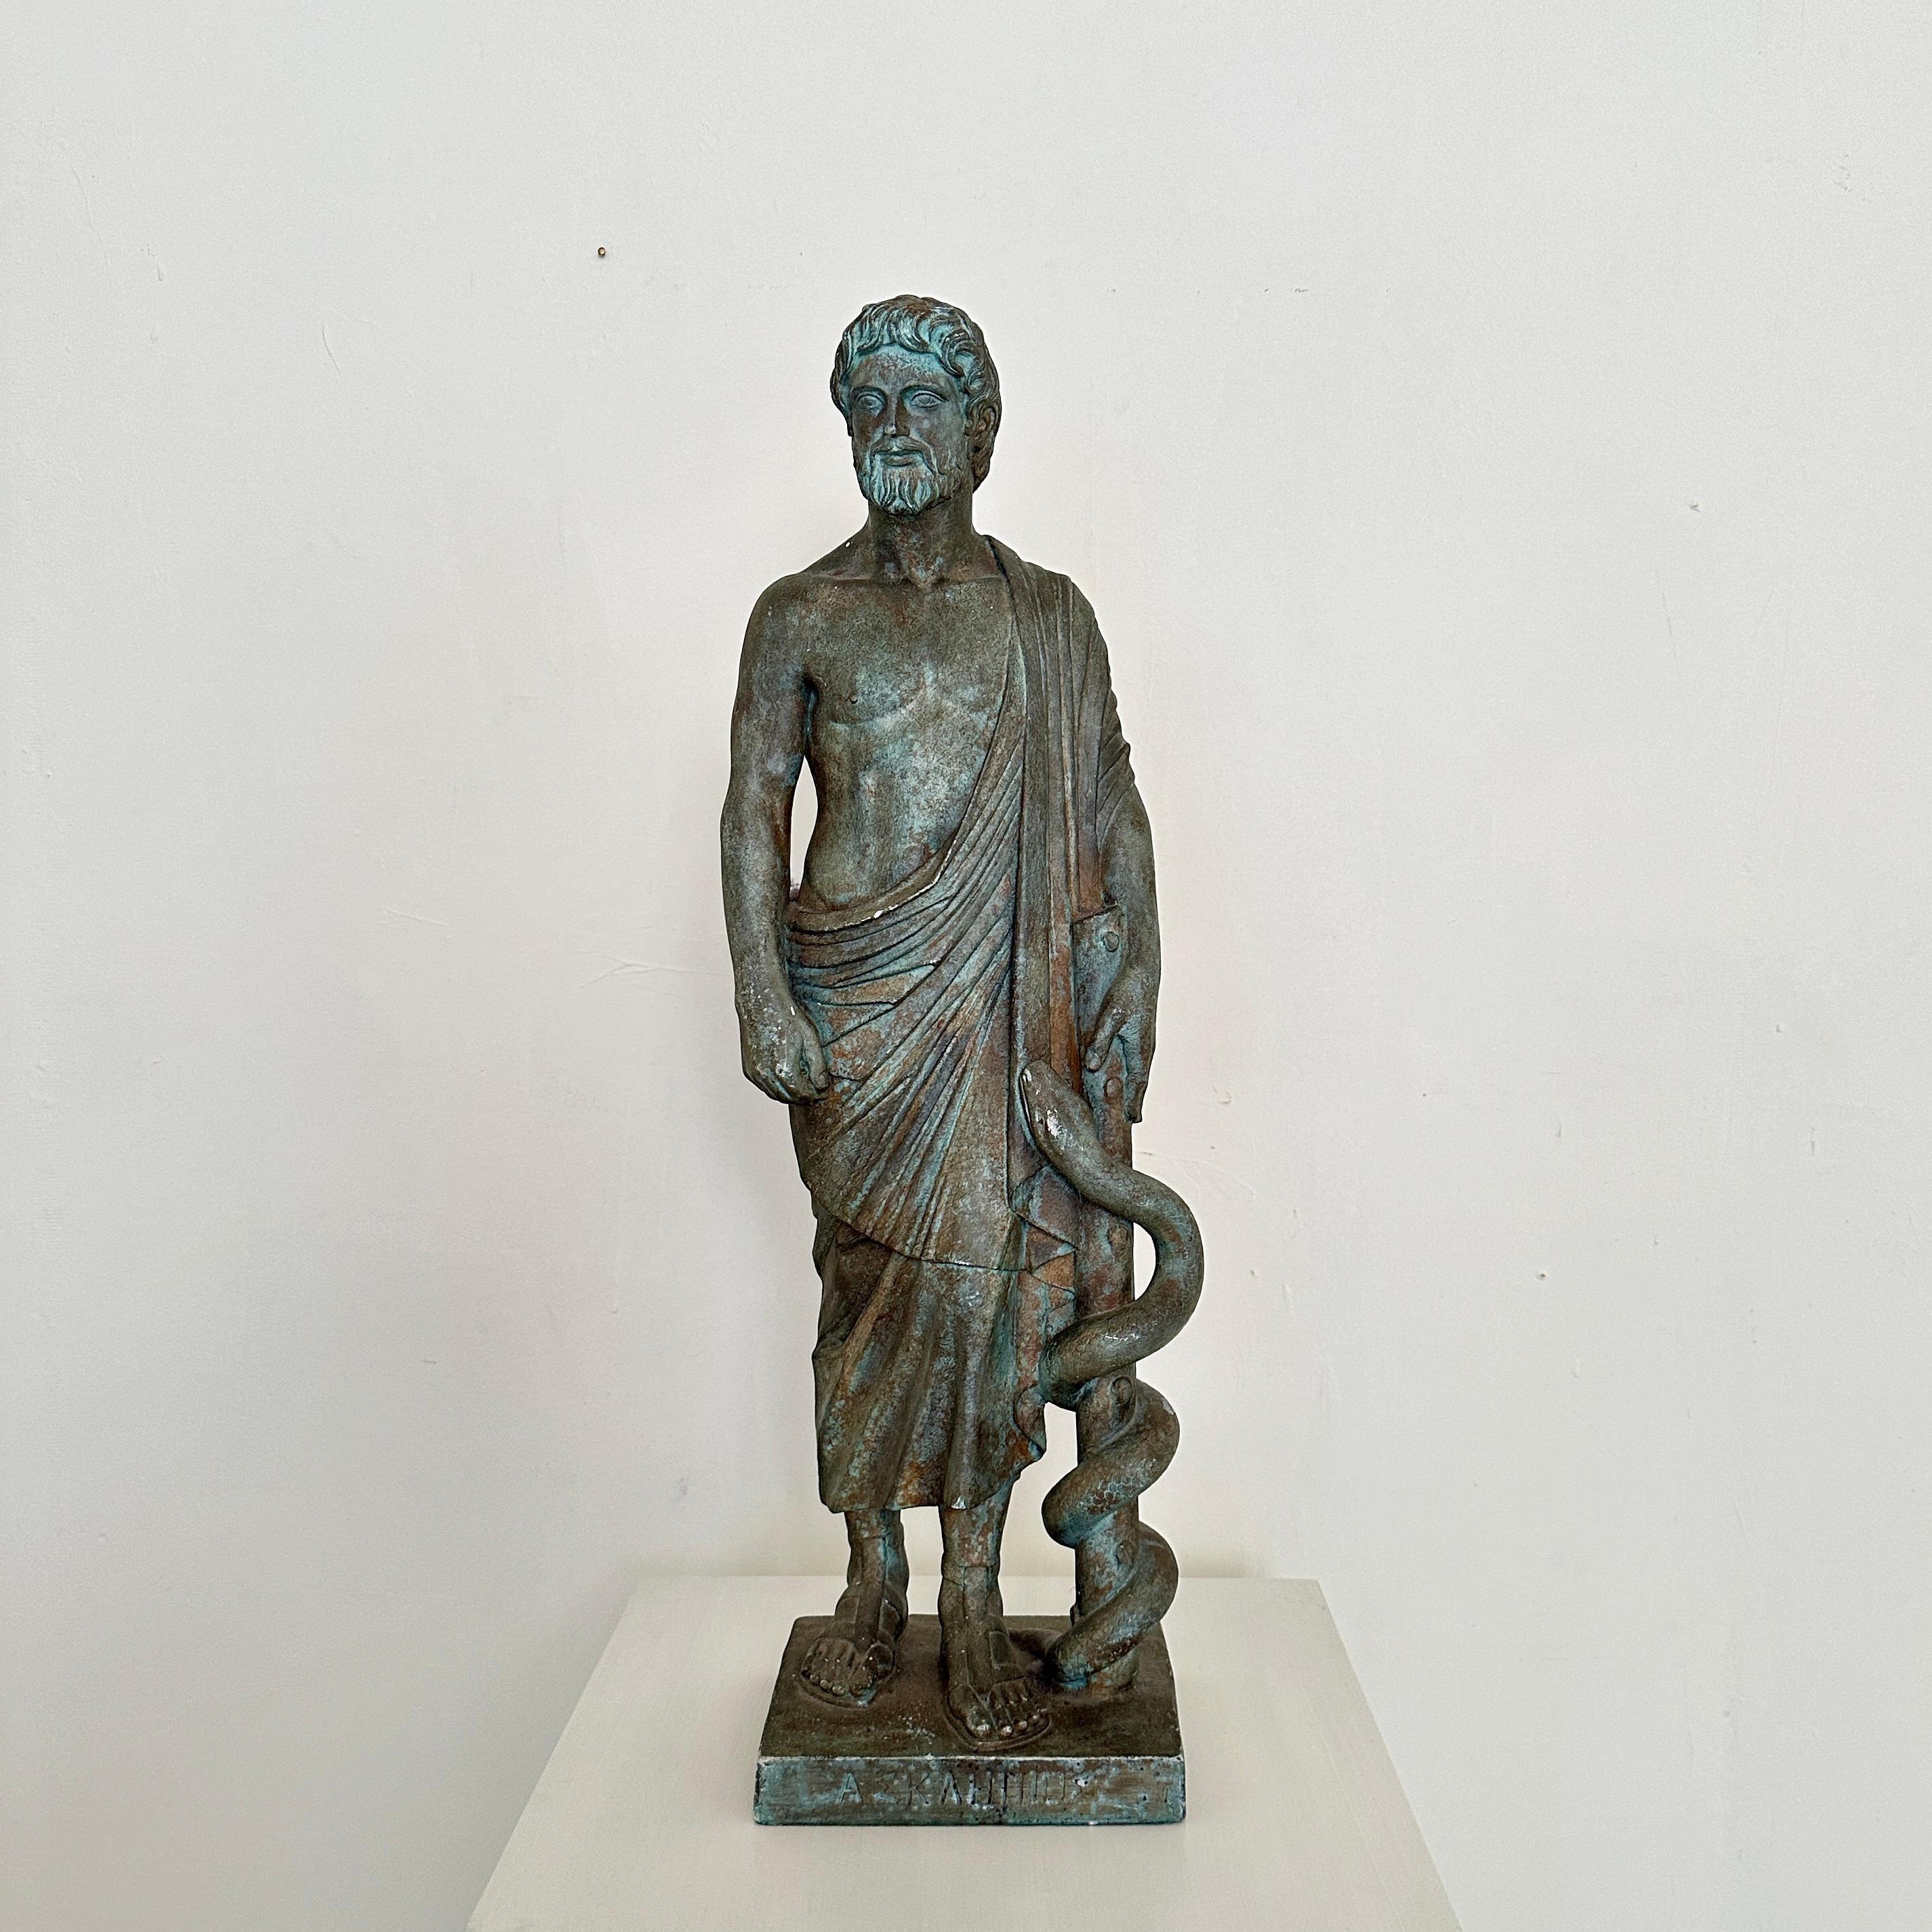 Crafted around 1960, the Classical Statue of Asklepios emerges as a timeless embodiment of healing and wisdom. Fashioned from patinated plaster, it exudes an aura of ancient reverence, capturing the essence of the revered Greek god of medicine.